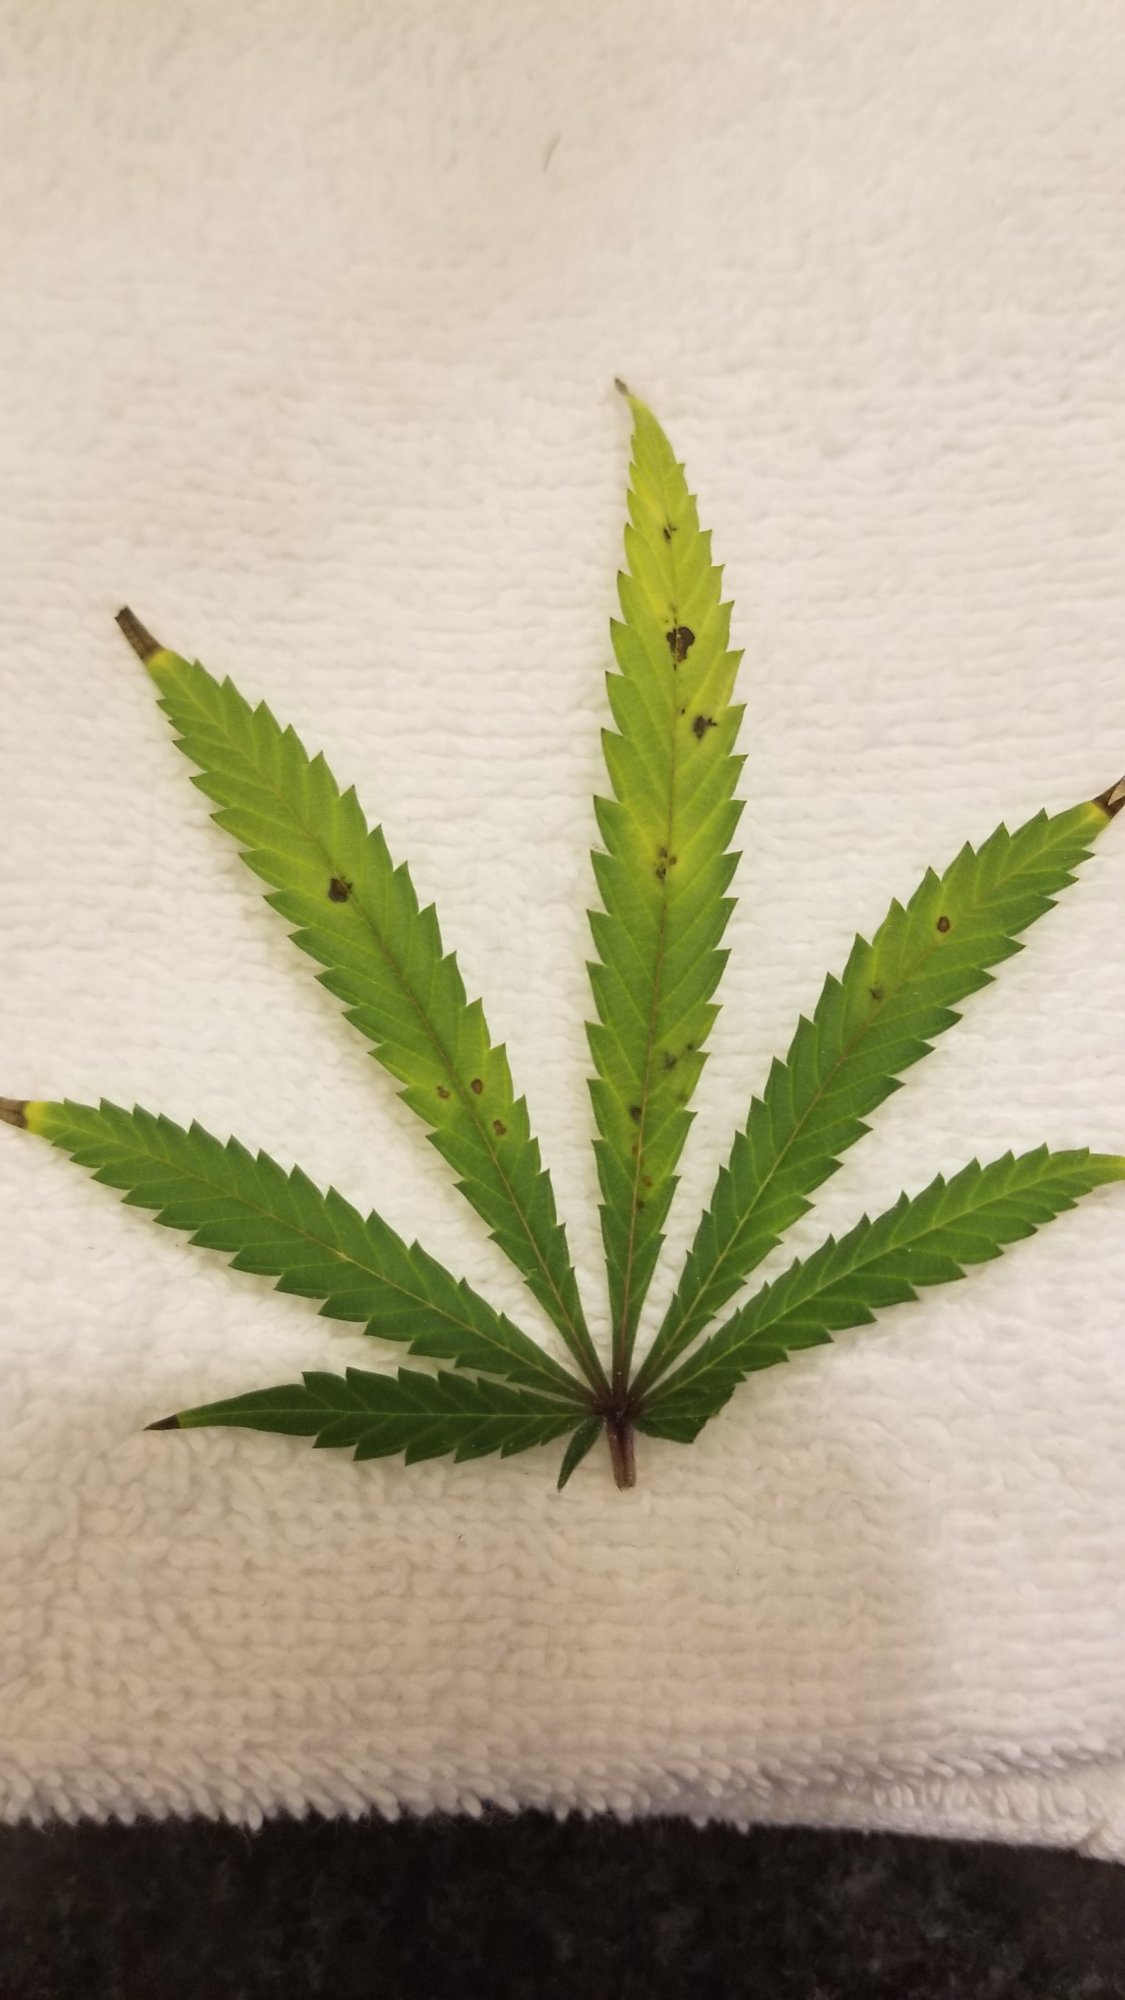 Is this mold or a deficiency